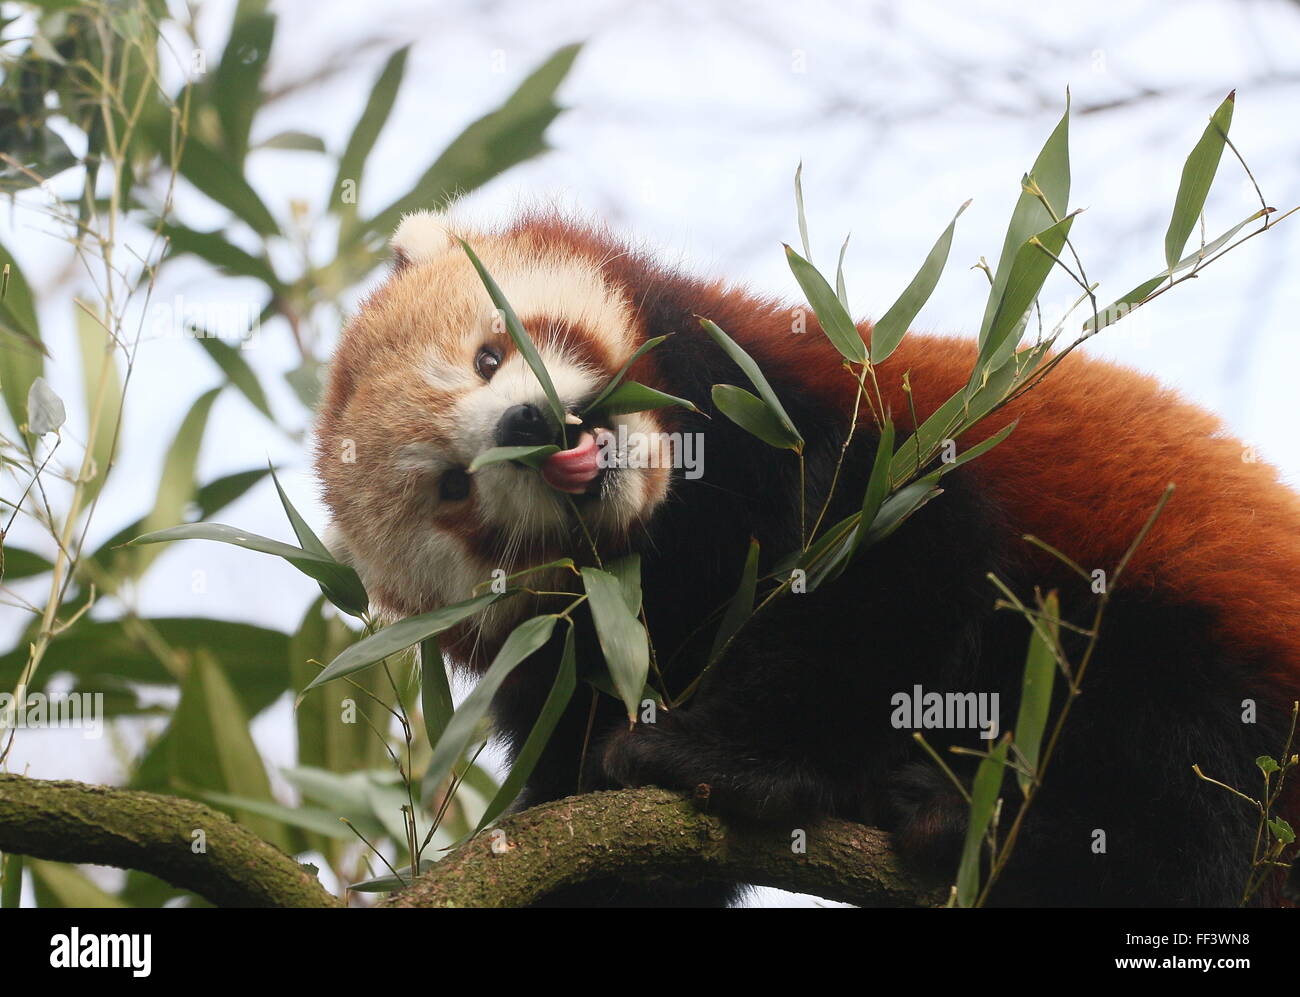 Close-up of the head of an Asian Red Panda (Ailurus fulgens) in a tree, chewing on bamboo leaves. Stock Photo